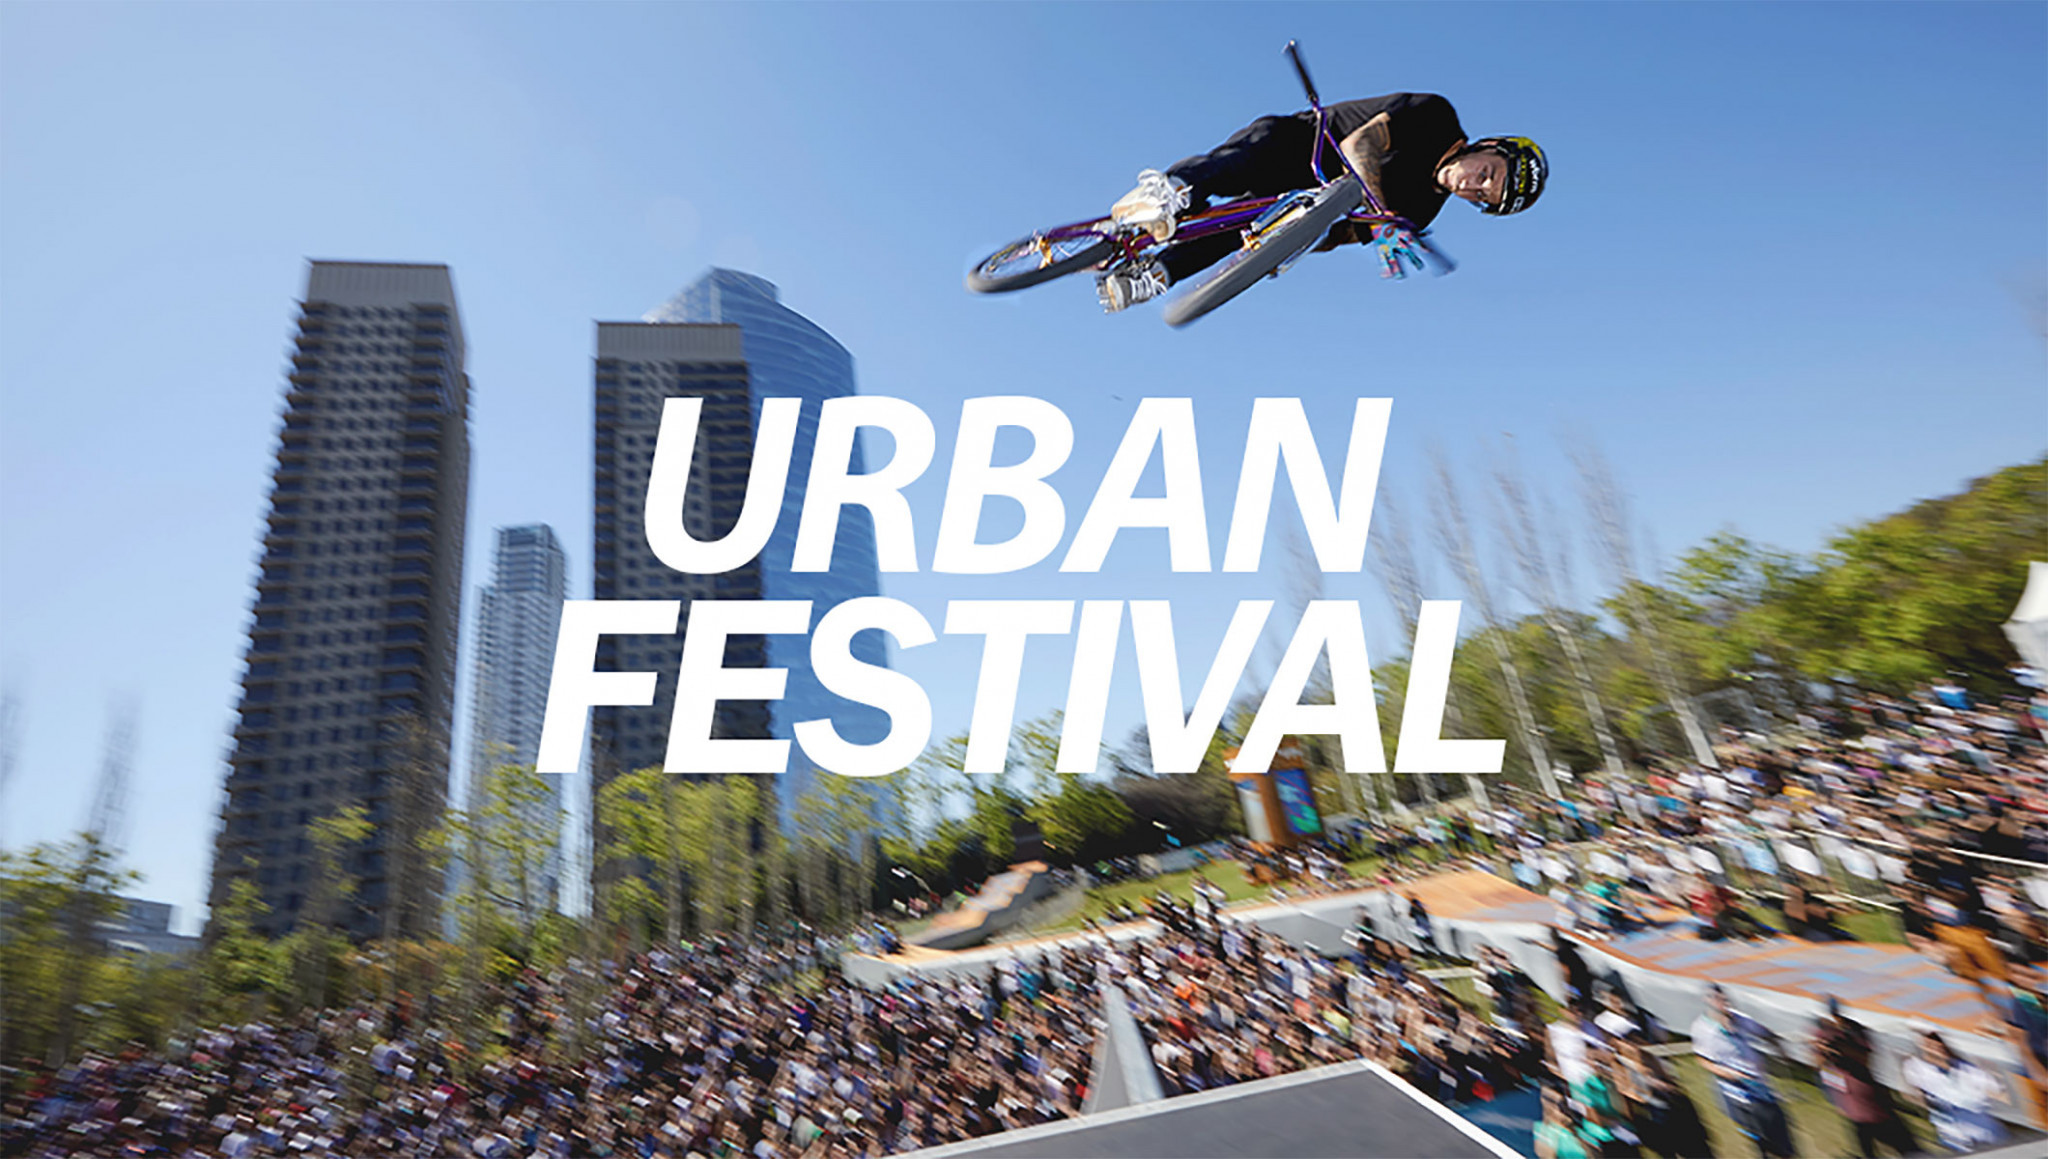 The Urban Festival is one of three symbolic features that will be developed at 